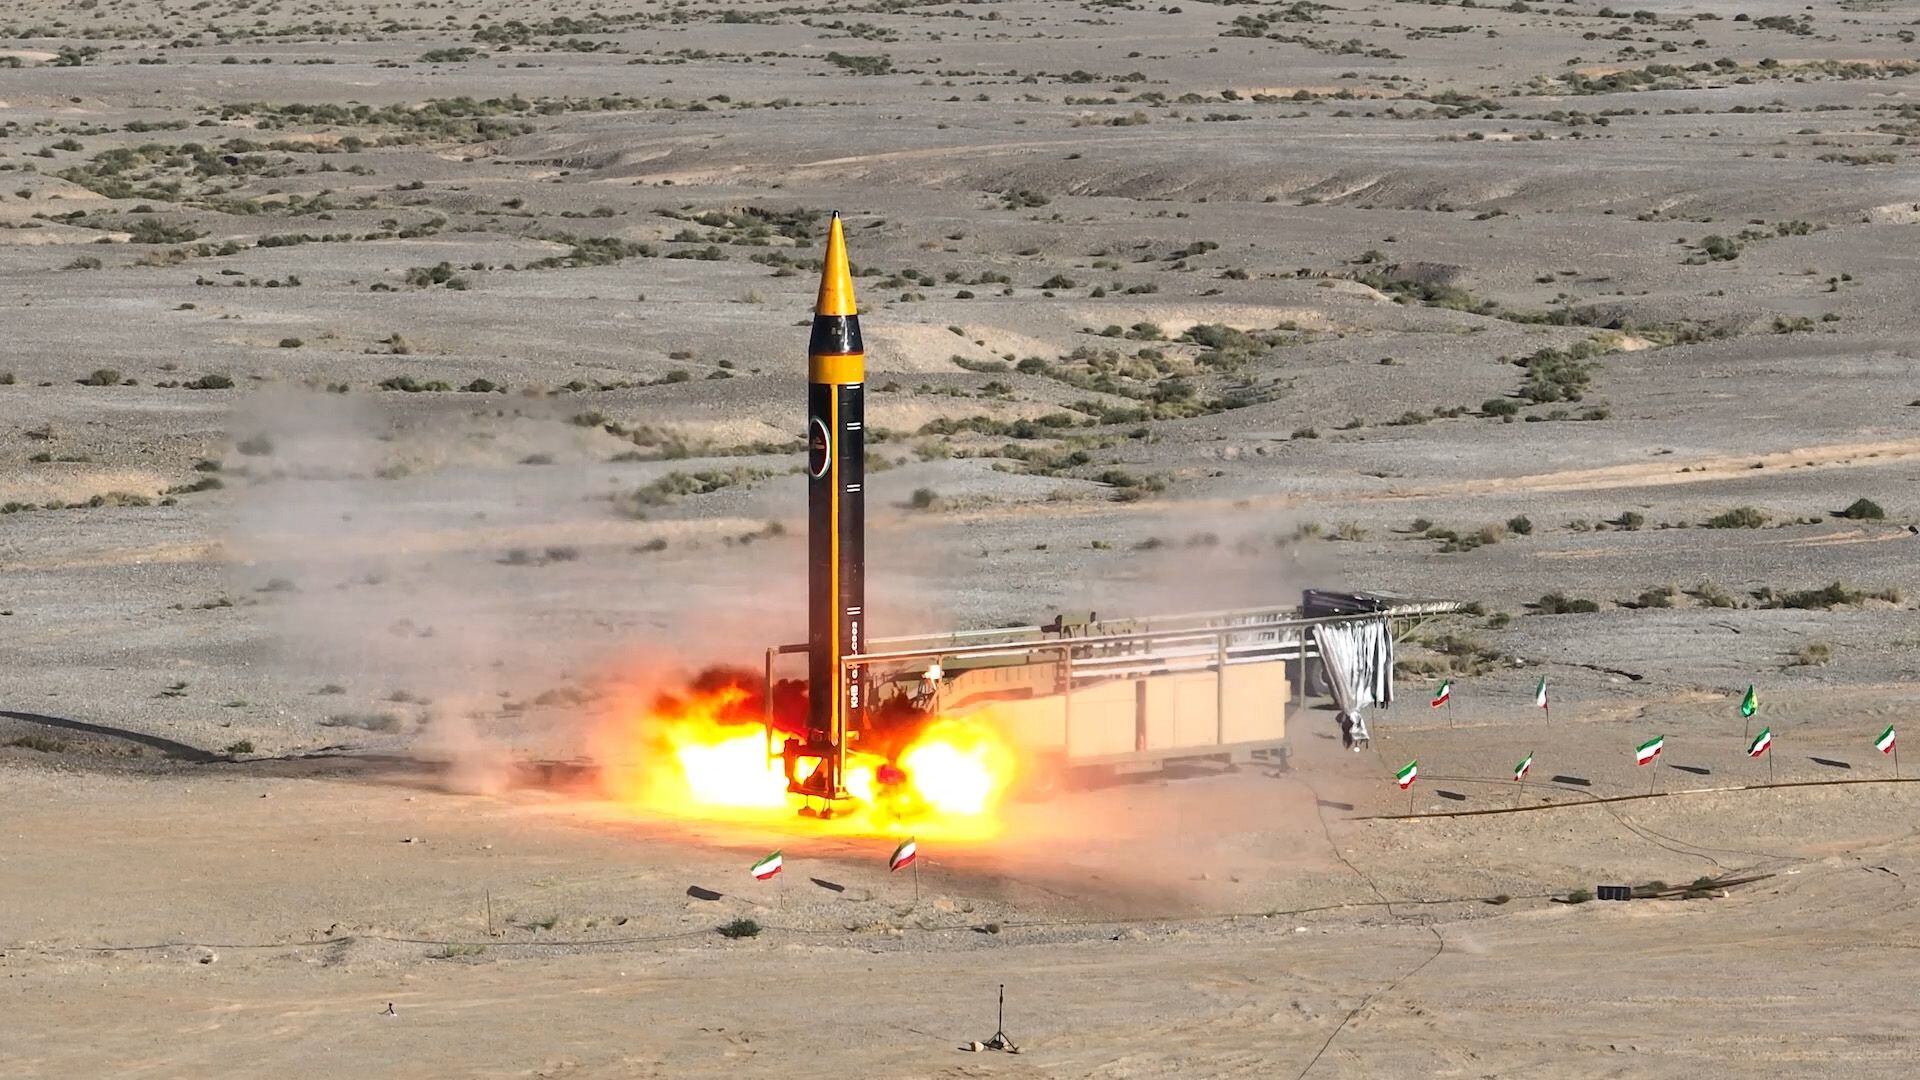 A handout picture provided by Iran's Defence Ministry on May 25, 2023, shows the testing of the fourth generation Khorramshahr ballistic missile, named Khaibar, at an undisclosed location. Iran's defence ministry unveiled a new ballistic missile with a range of 2,000 kilometres (1,242 miles) and a capacity to carry warheads weighing over a tonne. The Kheibar missile -- the latest version of the Khorramshahr which is Iran's longest-range missile to date -- was unveiled alongside a replica of the Al-Aqsa mosque in east Jerusalem, in a live broascast on state television. (Photo by IRANIAN DEFENCE MINISTRY / AFP) / == RESTRICTED TO EDITORIAL USE - MANDATORY CREDIT 